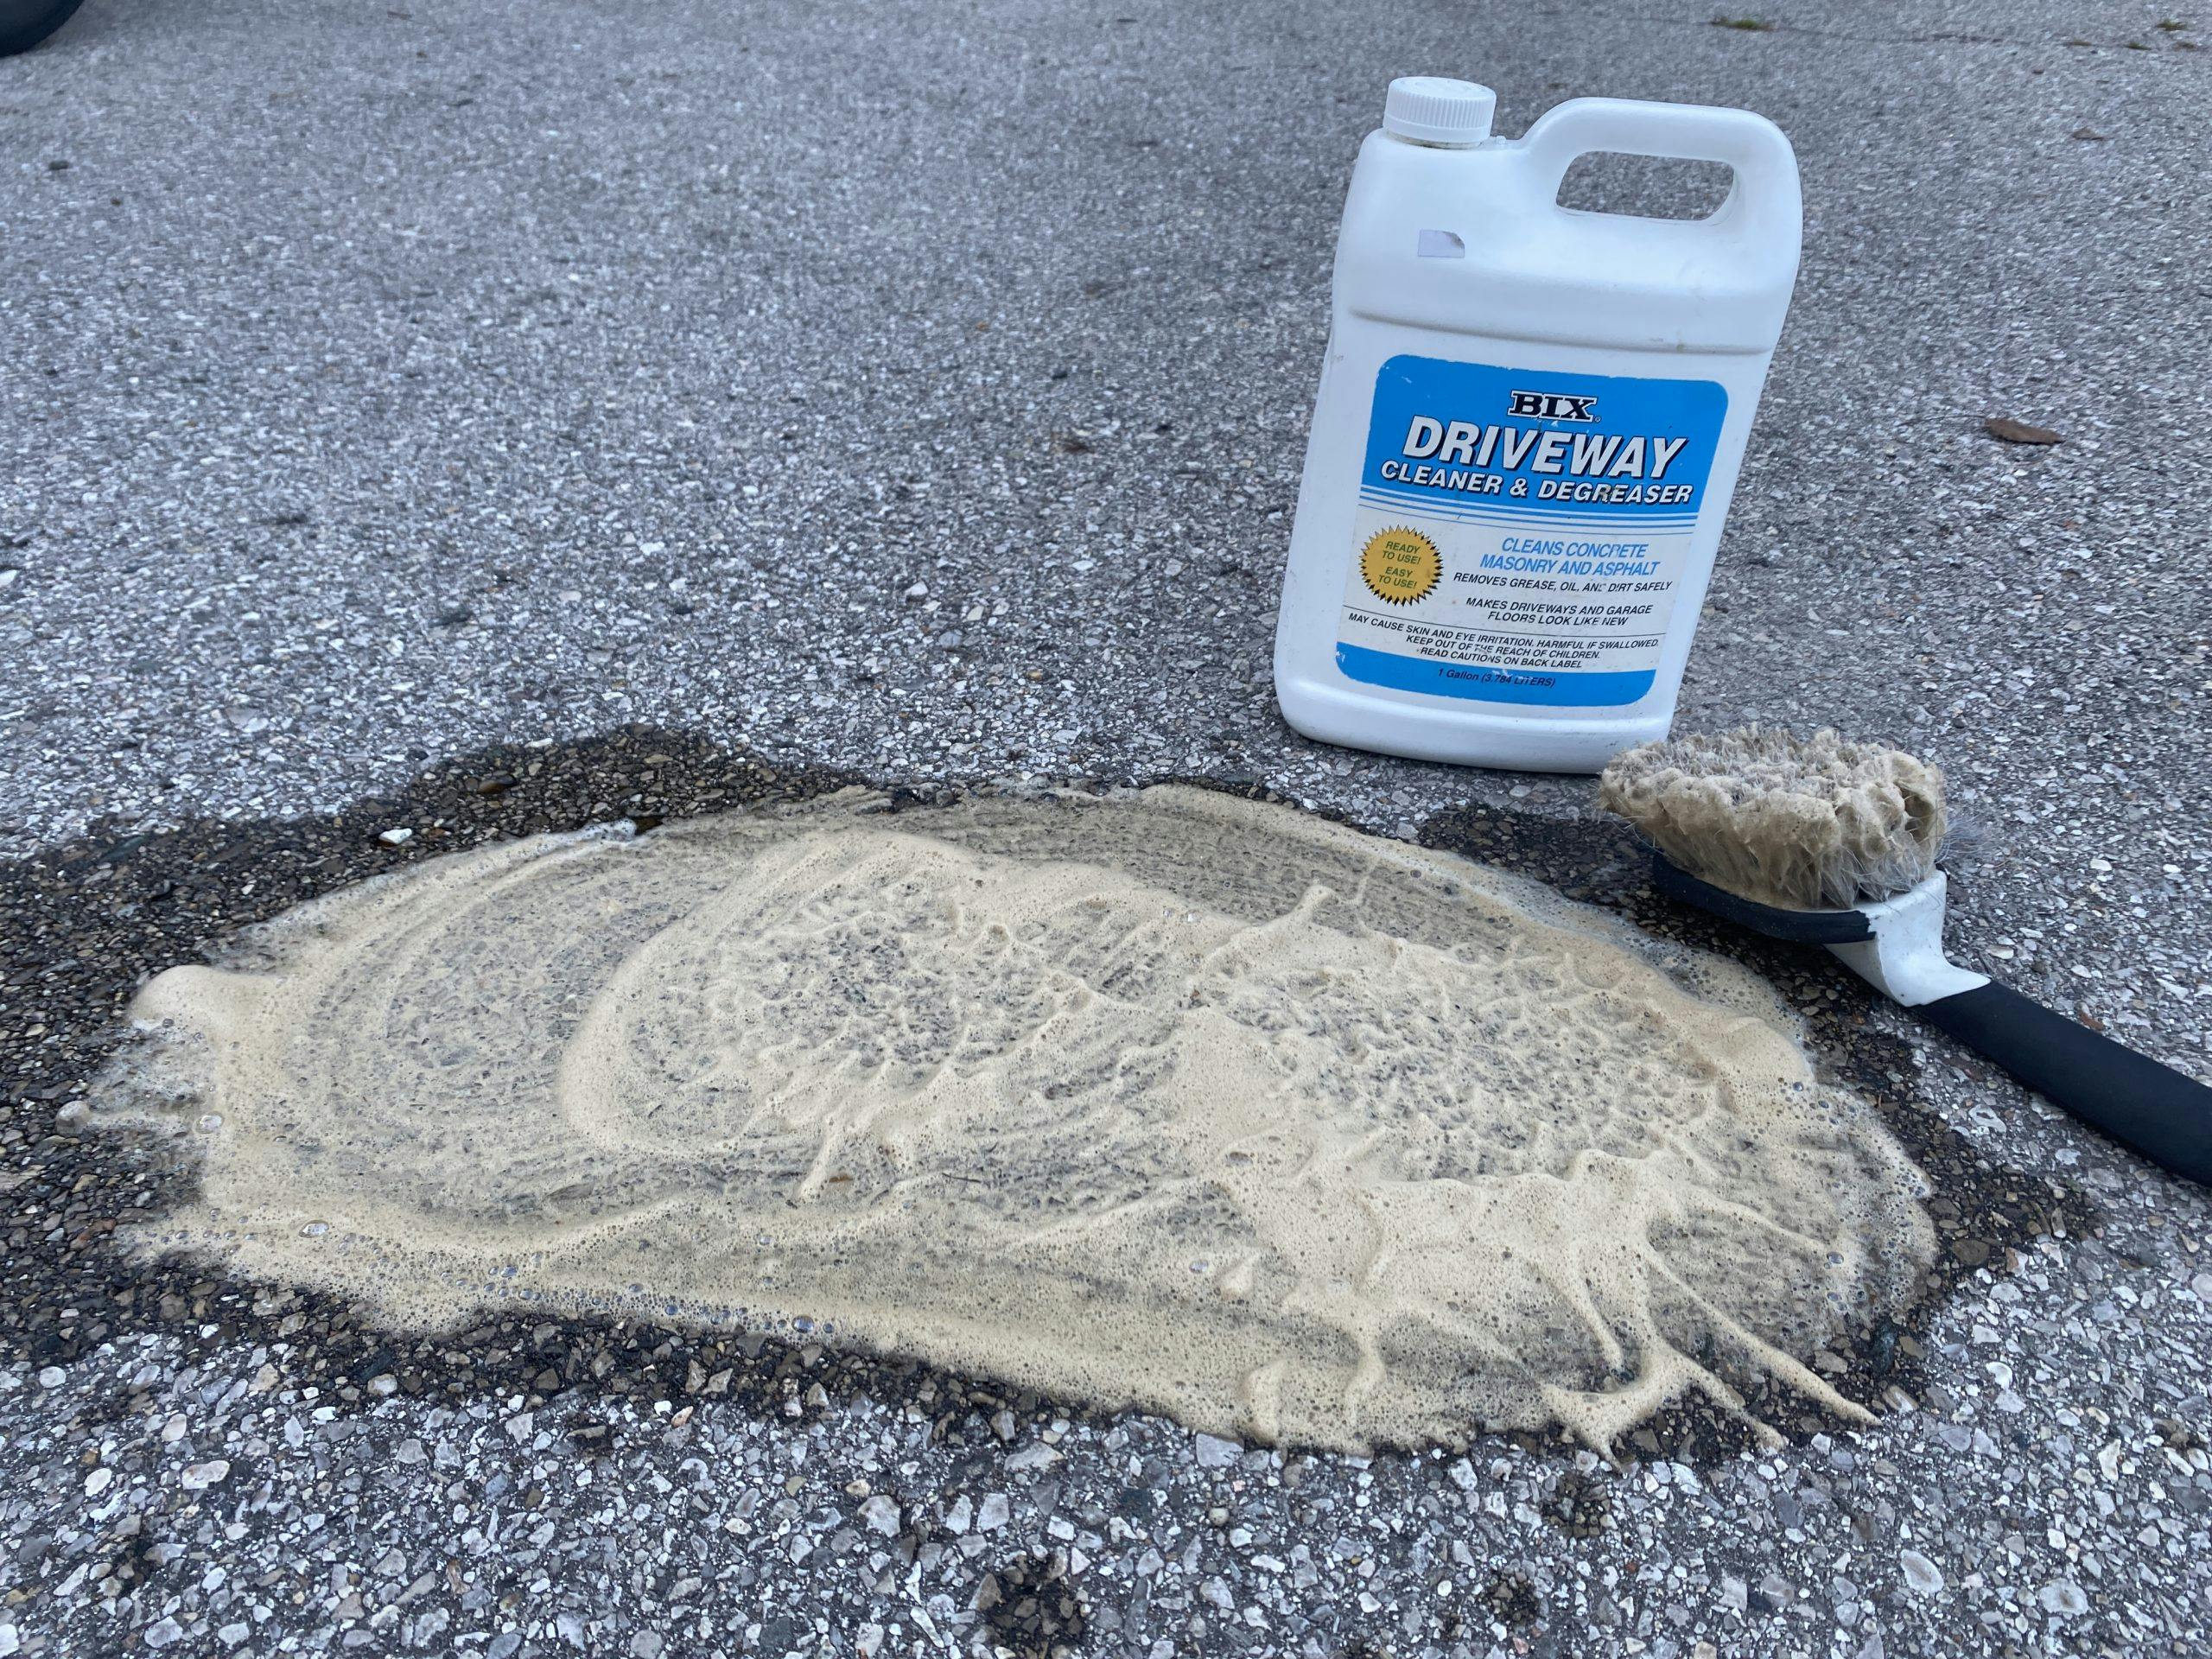 Bix cleaner on driveway stain